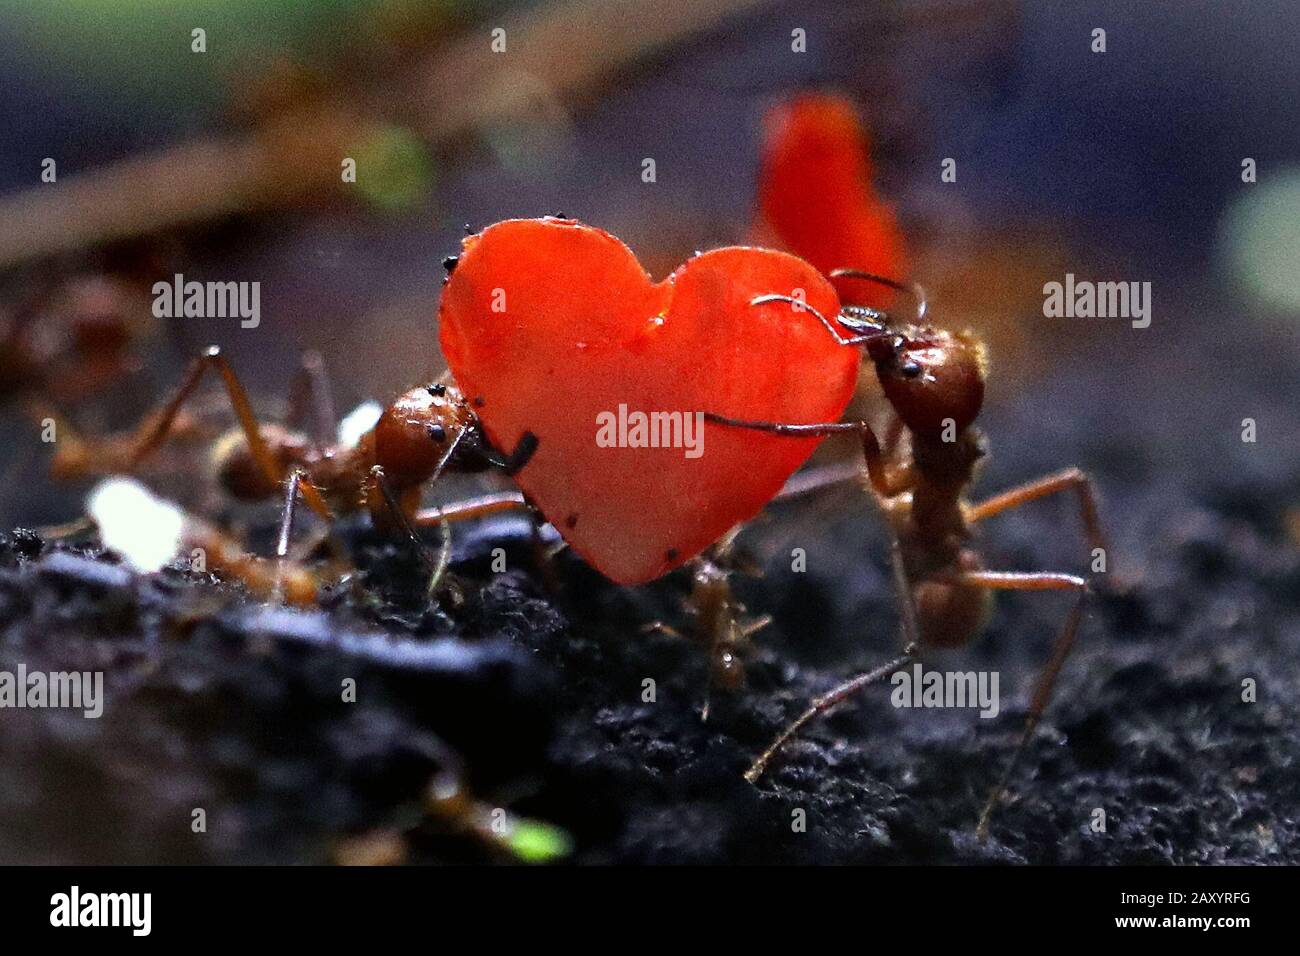 Leafcutter ants carrying peppers cut into the shape of hearts at Blair Drummond Safari Park in Scotland. They might be the smallest animal at the Scottish safari park, but these ants are known for their impressive carrying abilities and can lift weights twenty times their body weight. The worker ants will take these heart-shaped petals back to their nest and use them as fertiliser for their food source. Stock Photo